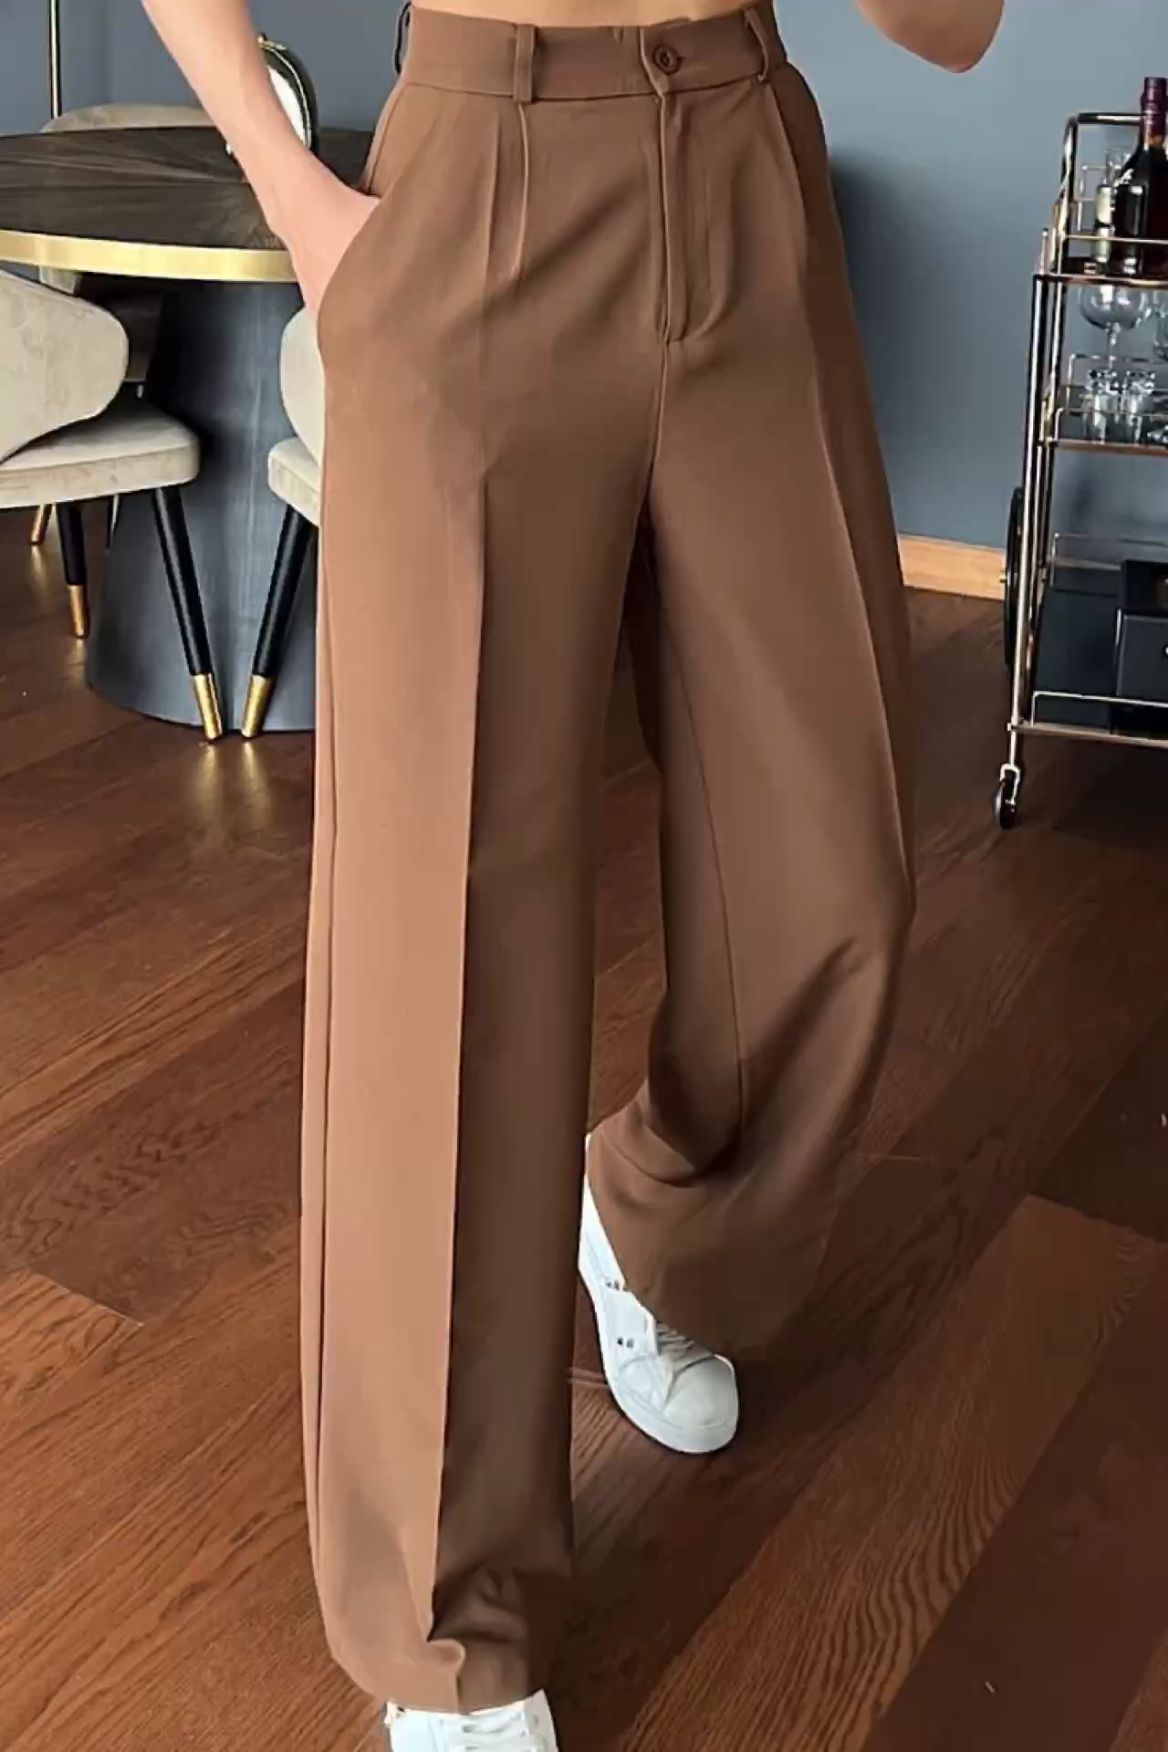 Elevate Your Wardrobe with These Chic
Women’s Slacks